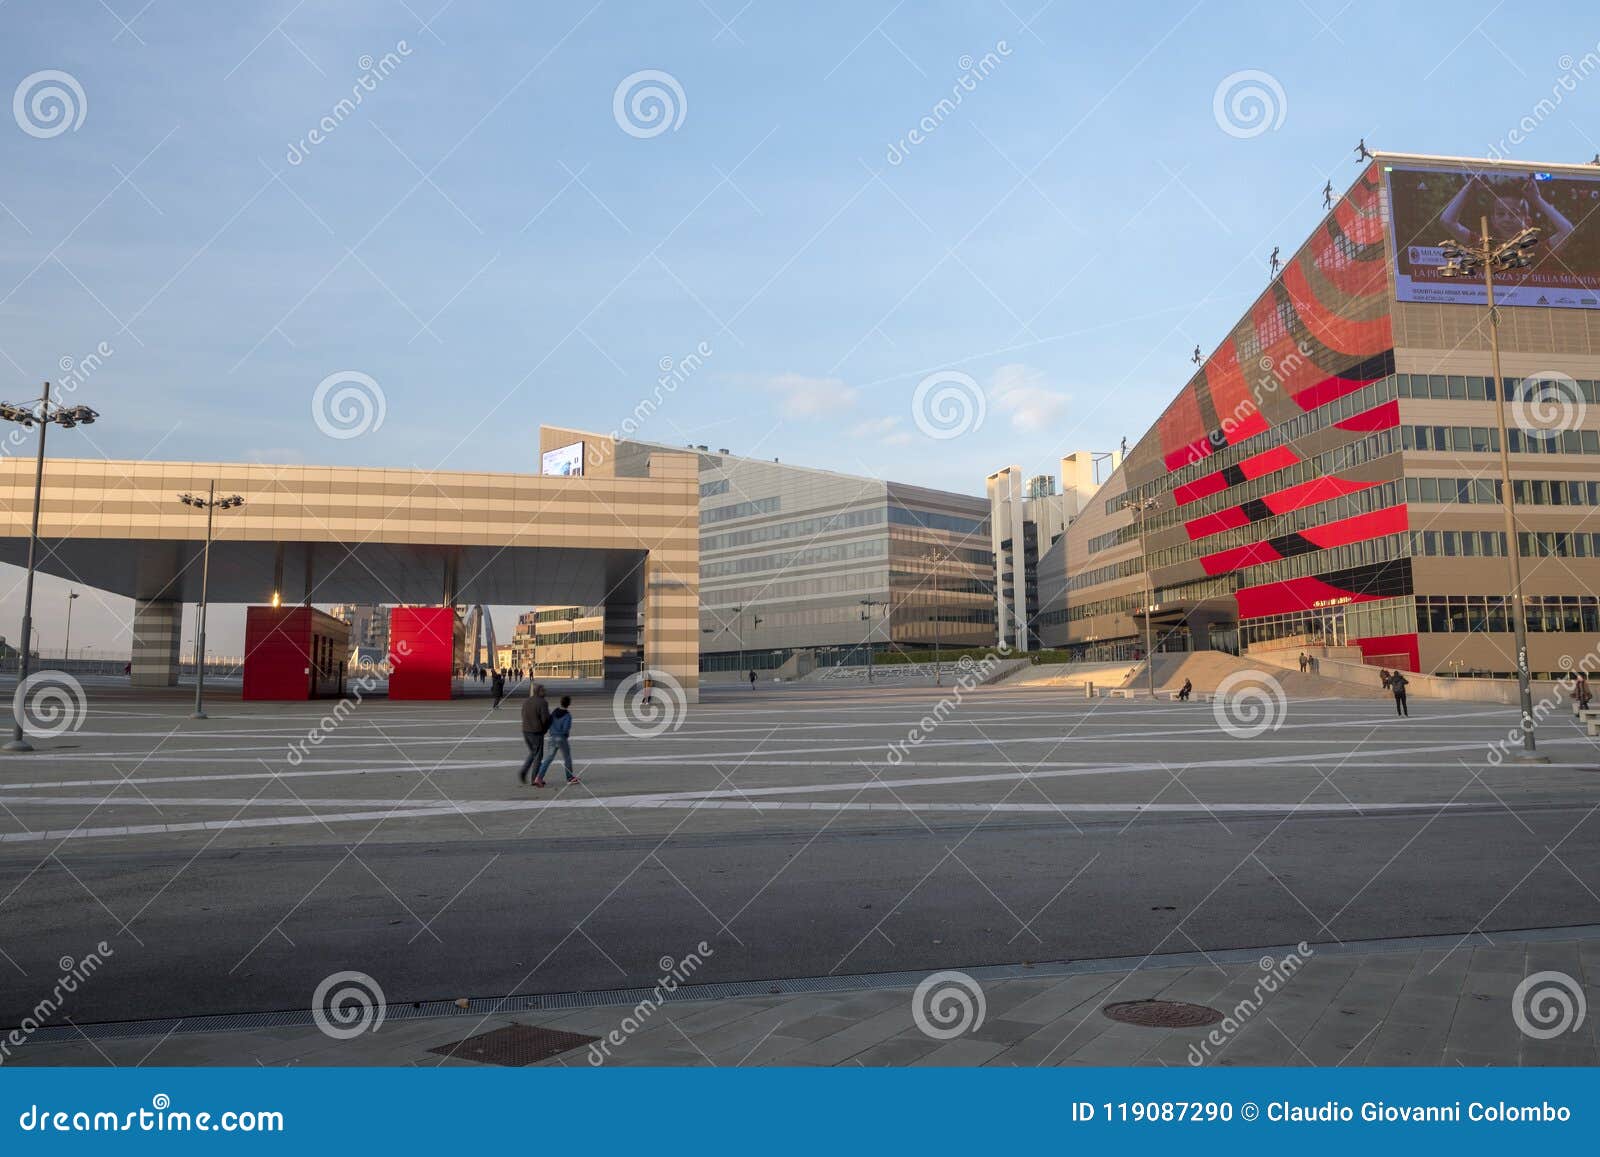 Milan: Modern Buildings of Portello Editorial Image - Image of square ...